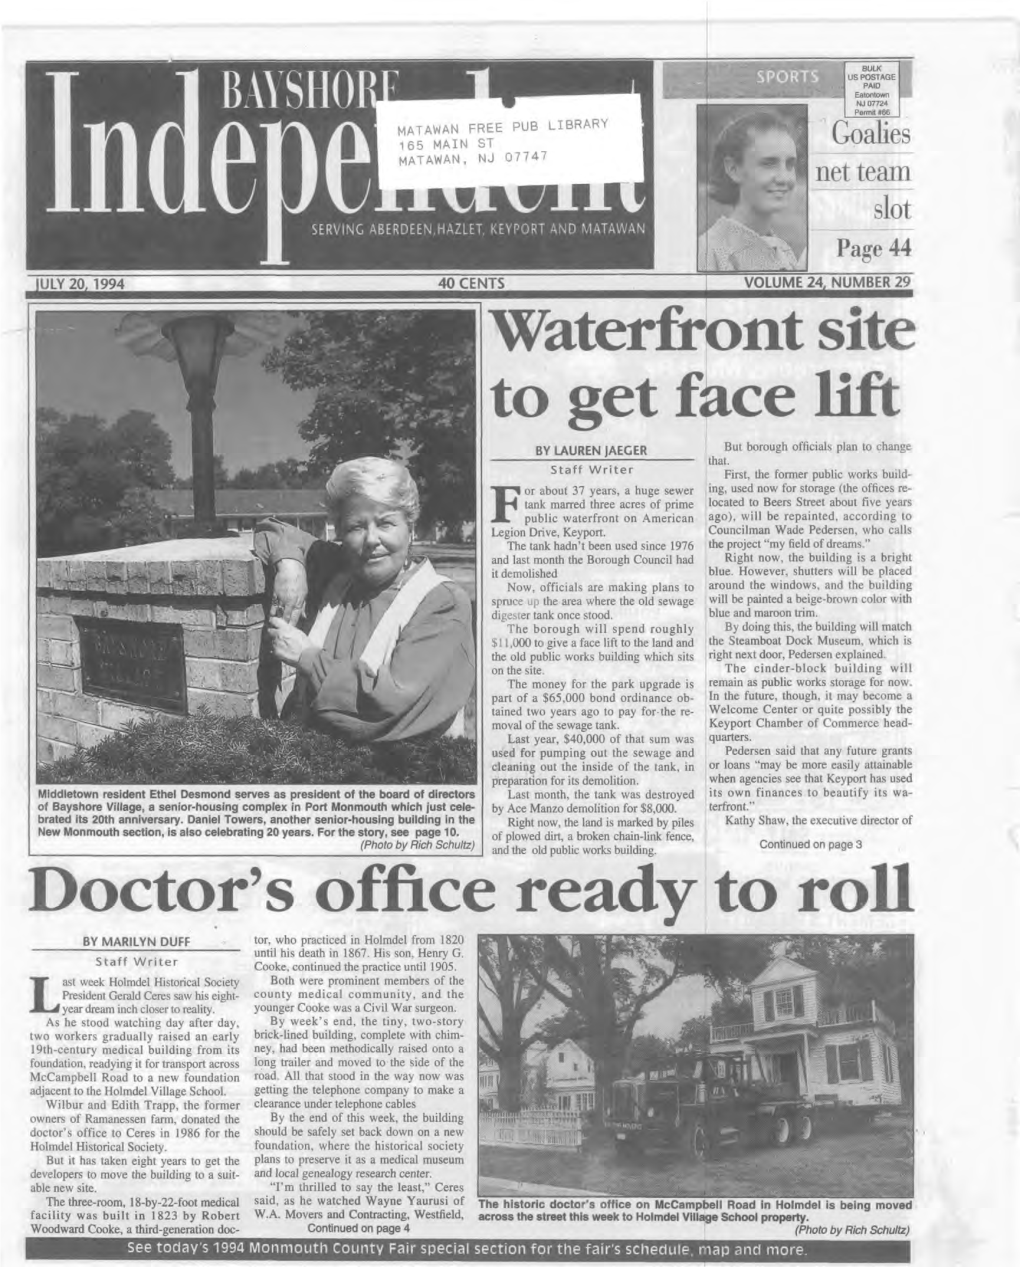 W Aterfront Site to Get Face Lift Doctor's Office Ready to Roll